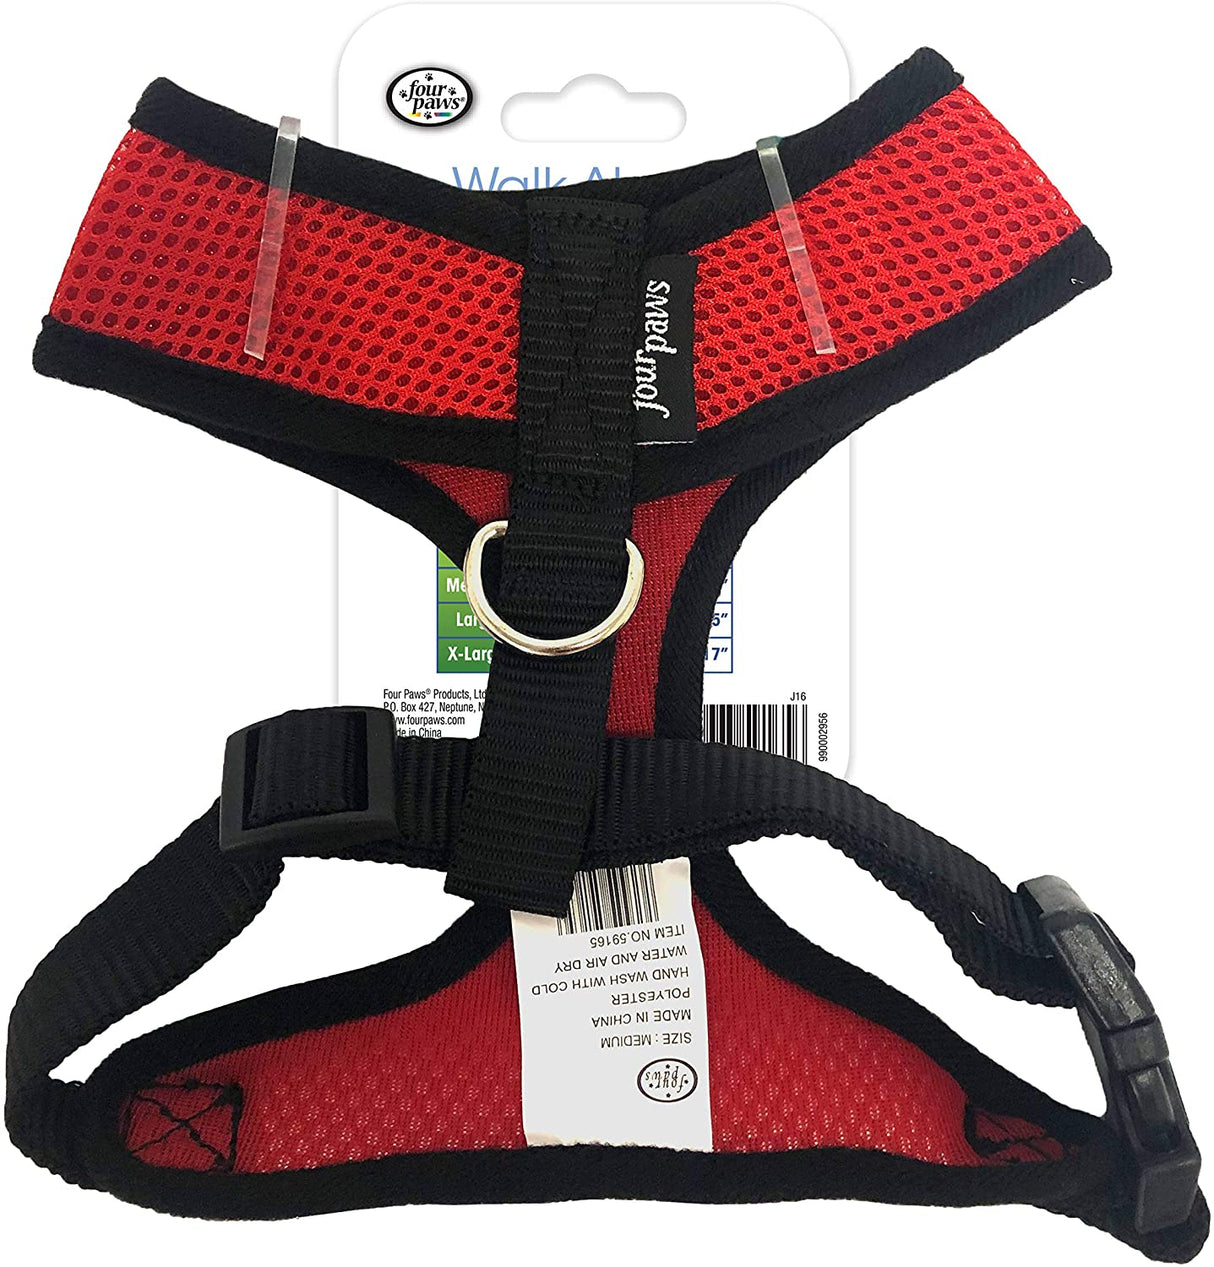 Medium - 1 count Four Paws Comfort Control Harness Red